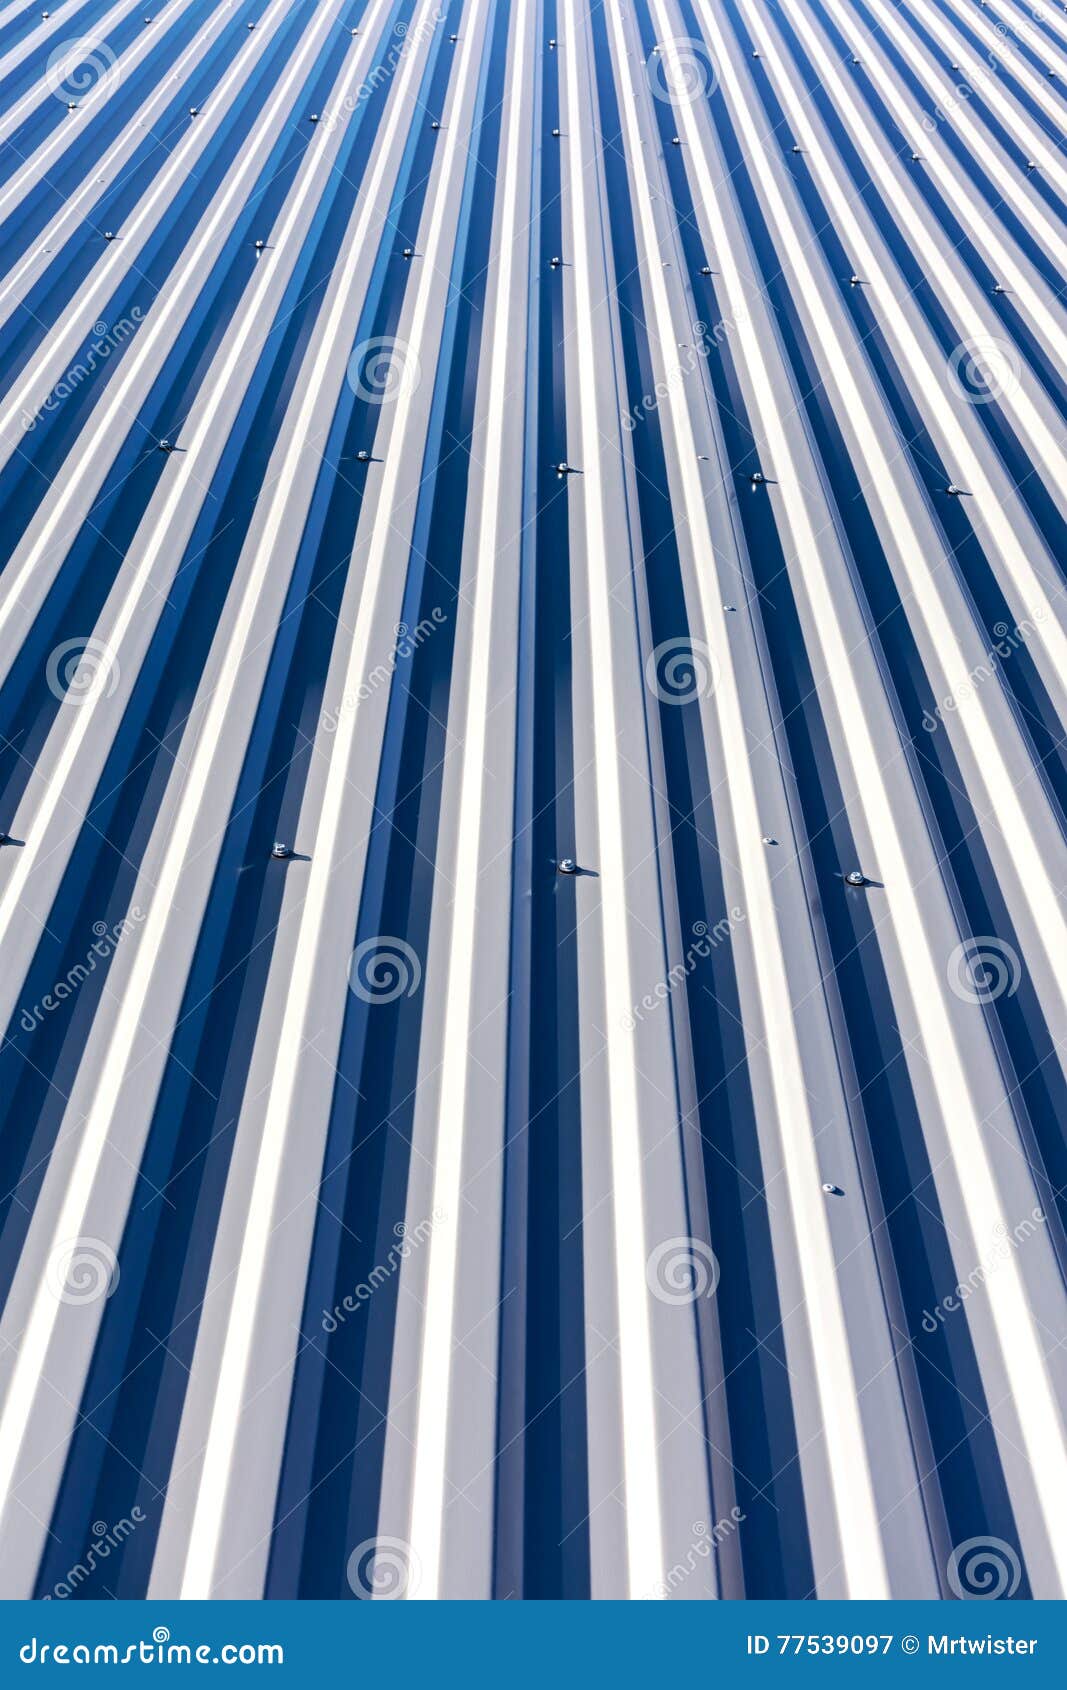 New Corrugated Metal Roof on Top of Industrial Building Stock Image ...